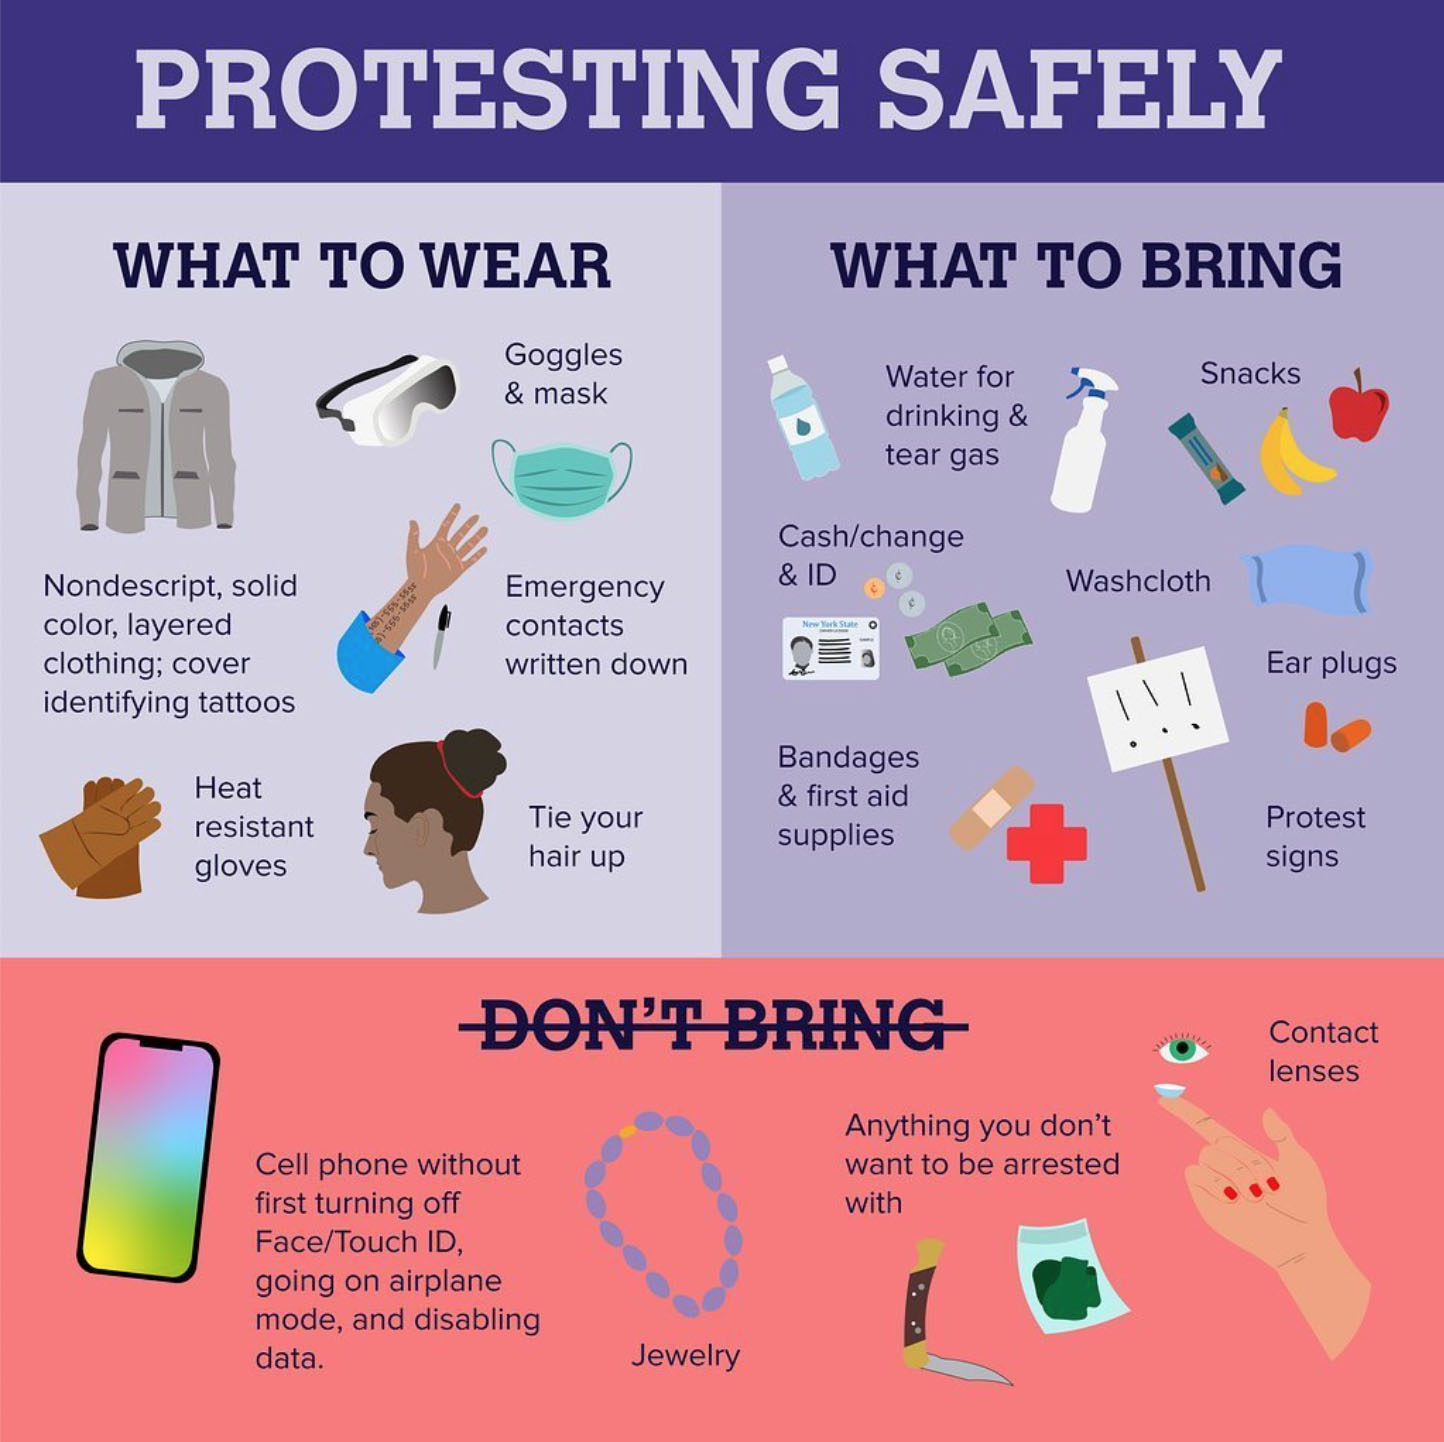 Protesting safely